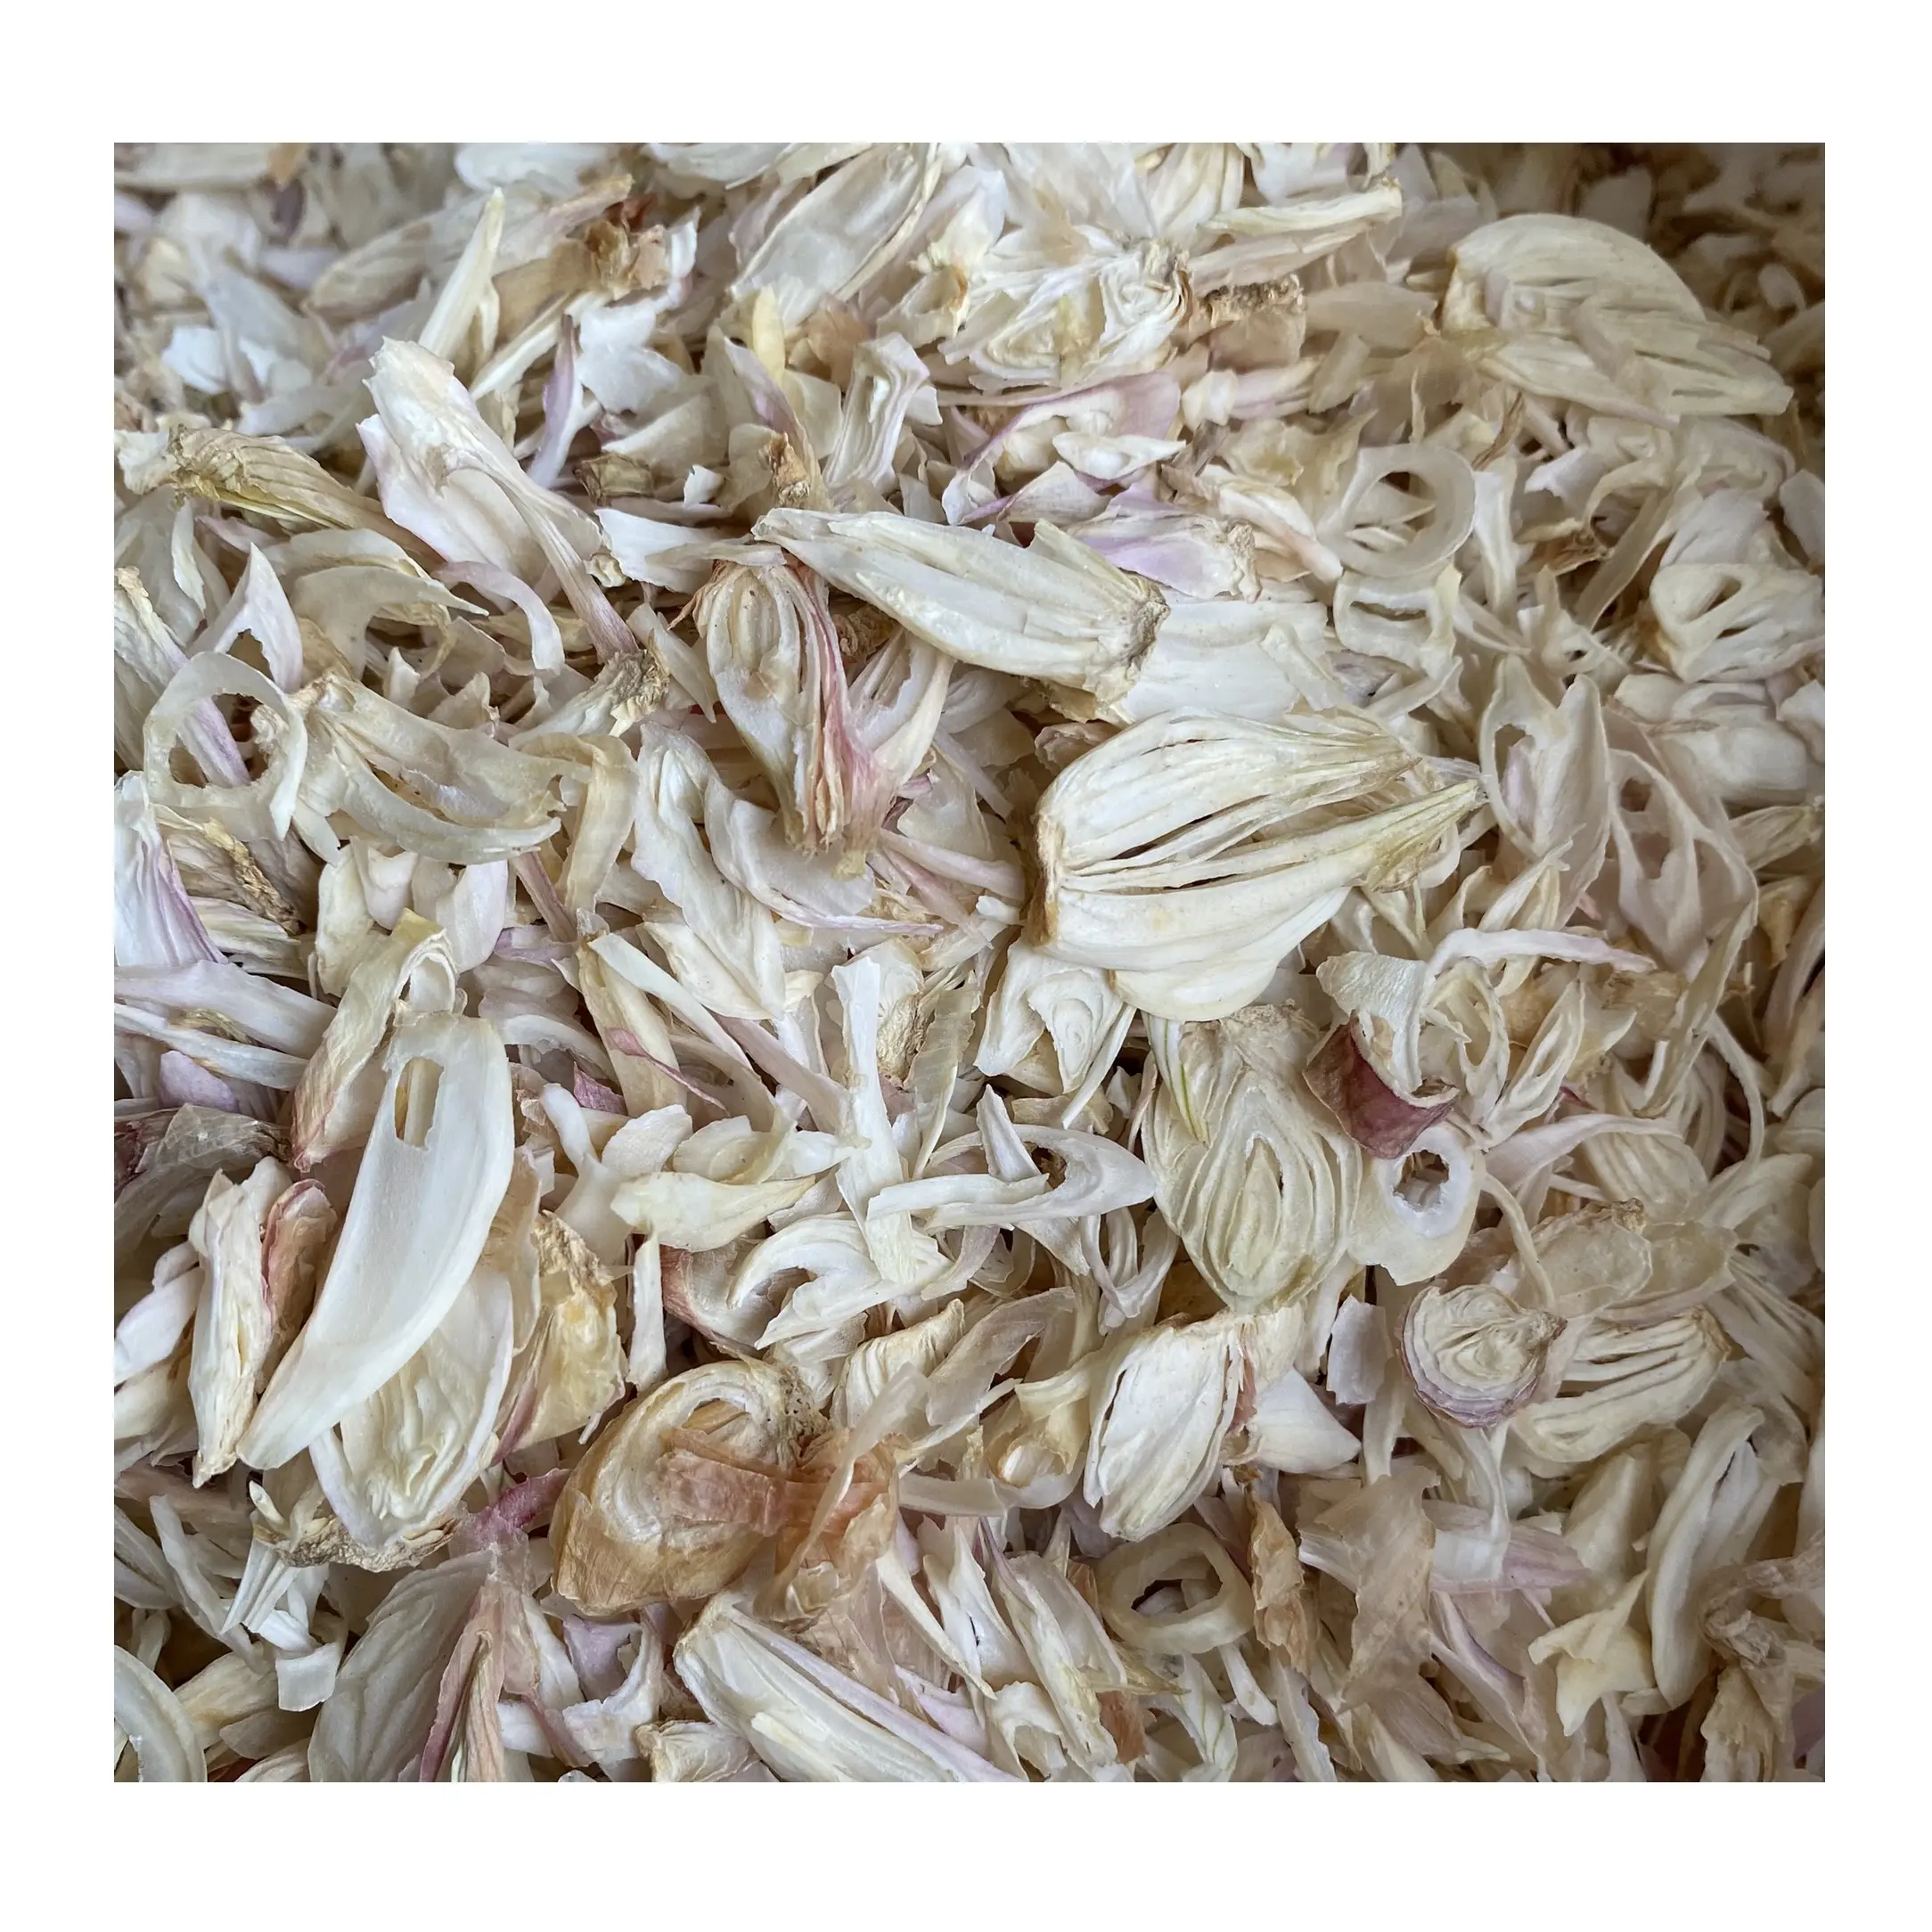 Hot Selling Vietnamese Dried Shallots Sliced Good Quality Contact Us Get The Best Price